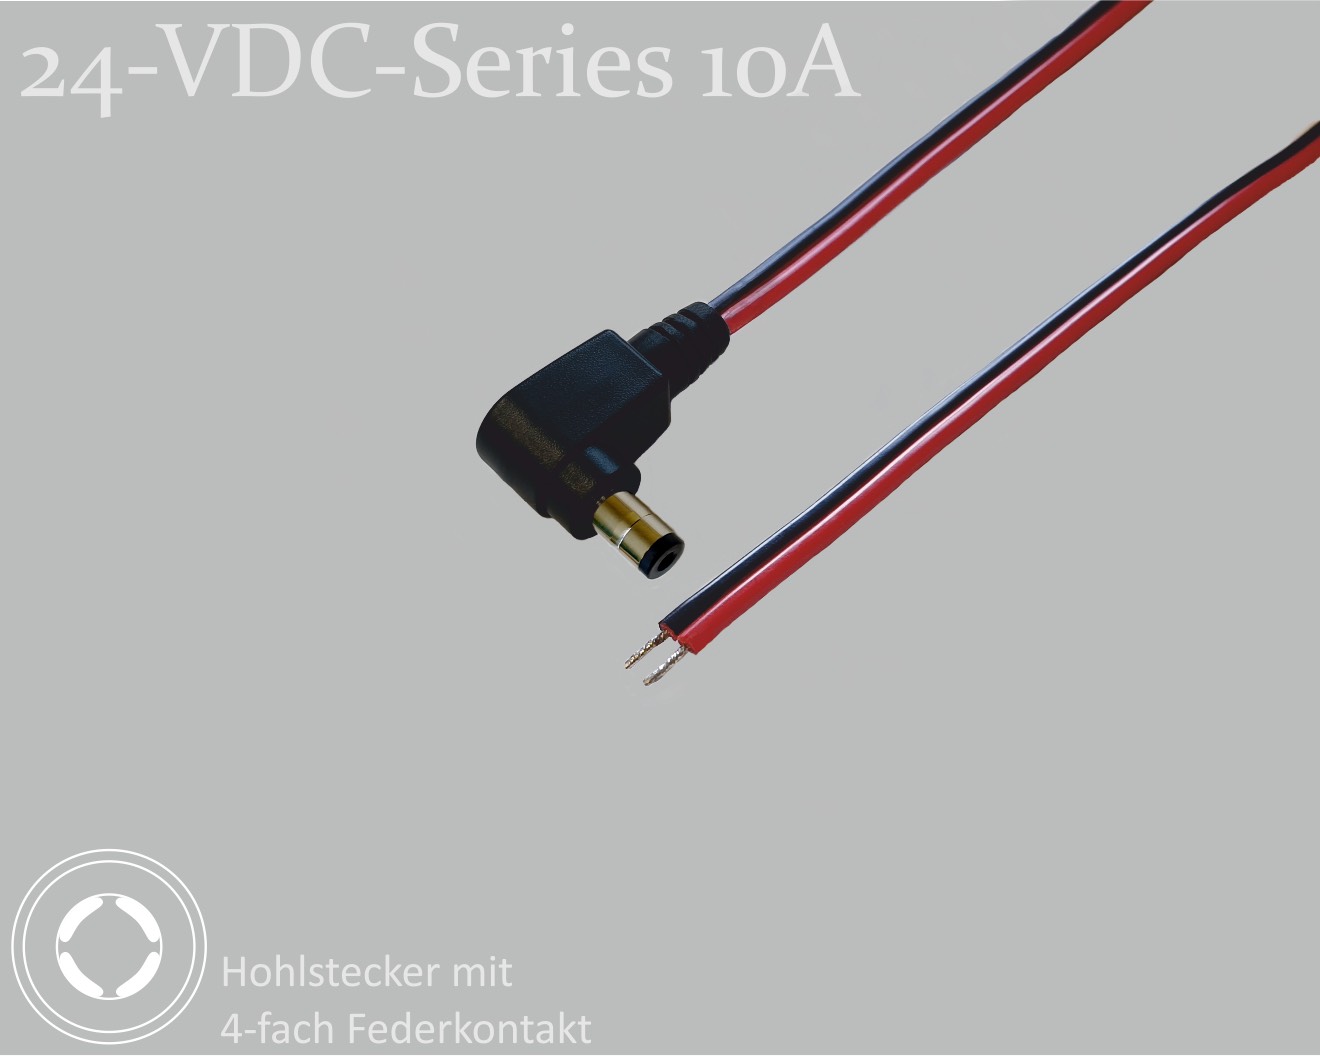 24-VDC-Series 10A, DC connection cable, DC right-angle plug with 4-spring contact 2.1x5.5x9.5mm, flat cable 2x0.75mm², red/black, tinned ends, 0.75m